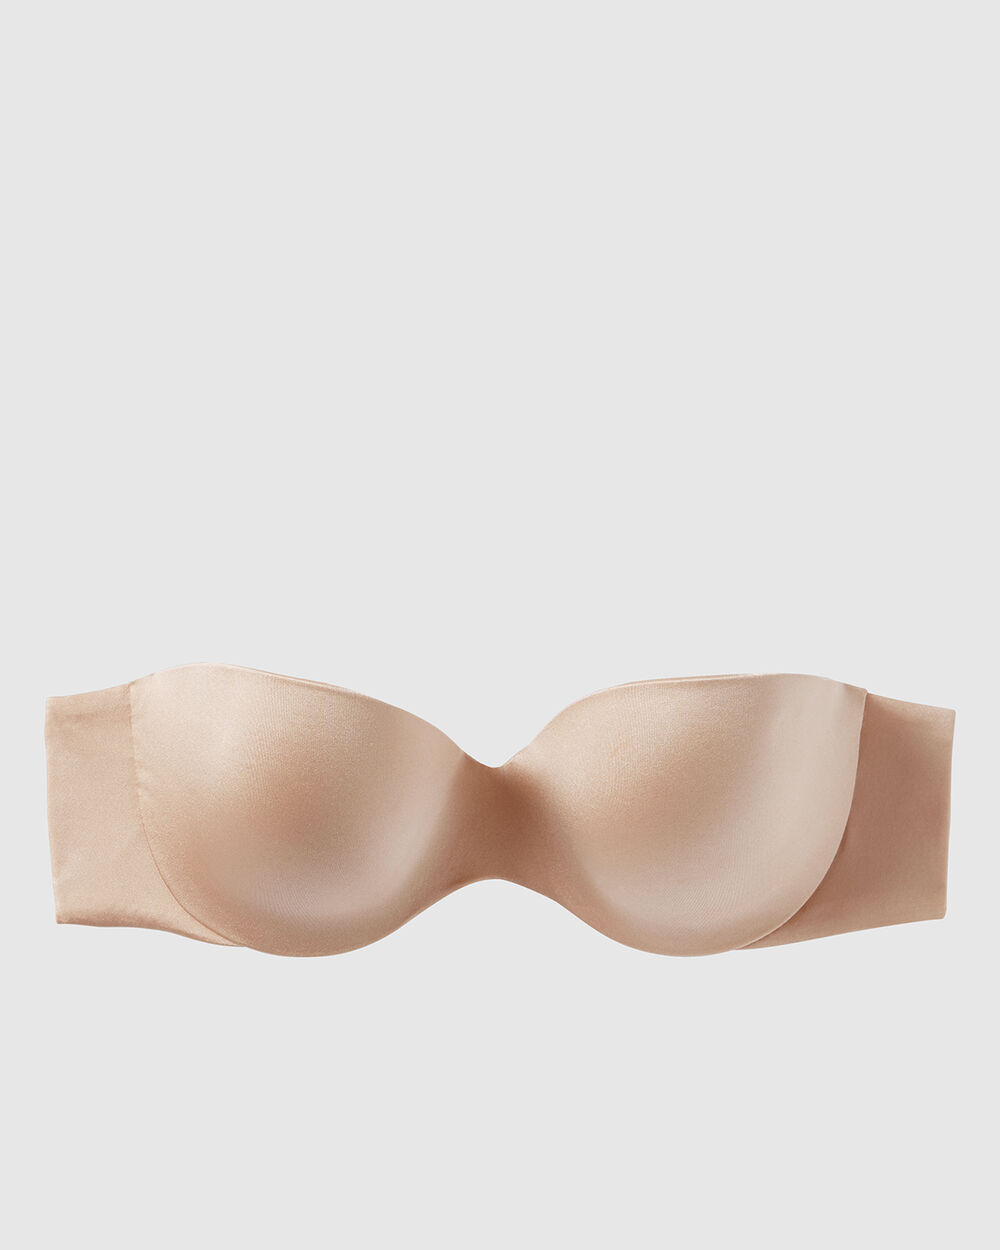 Strapless backless bra • Compare & see prices now »